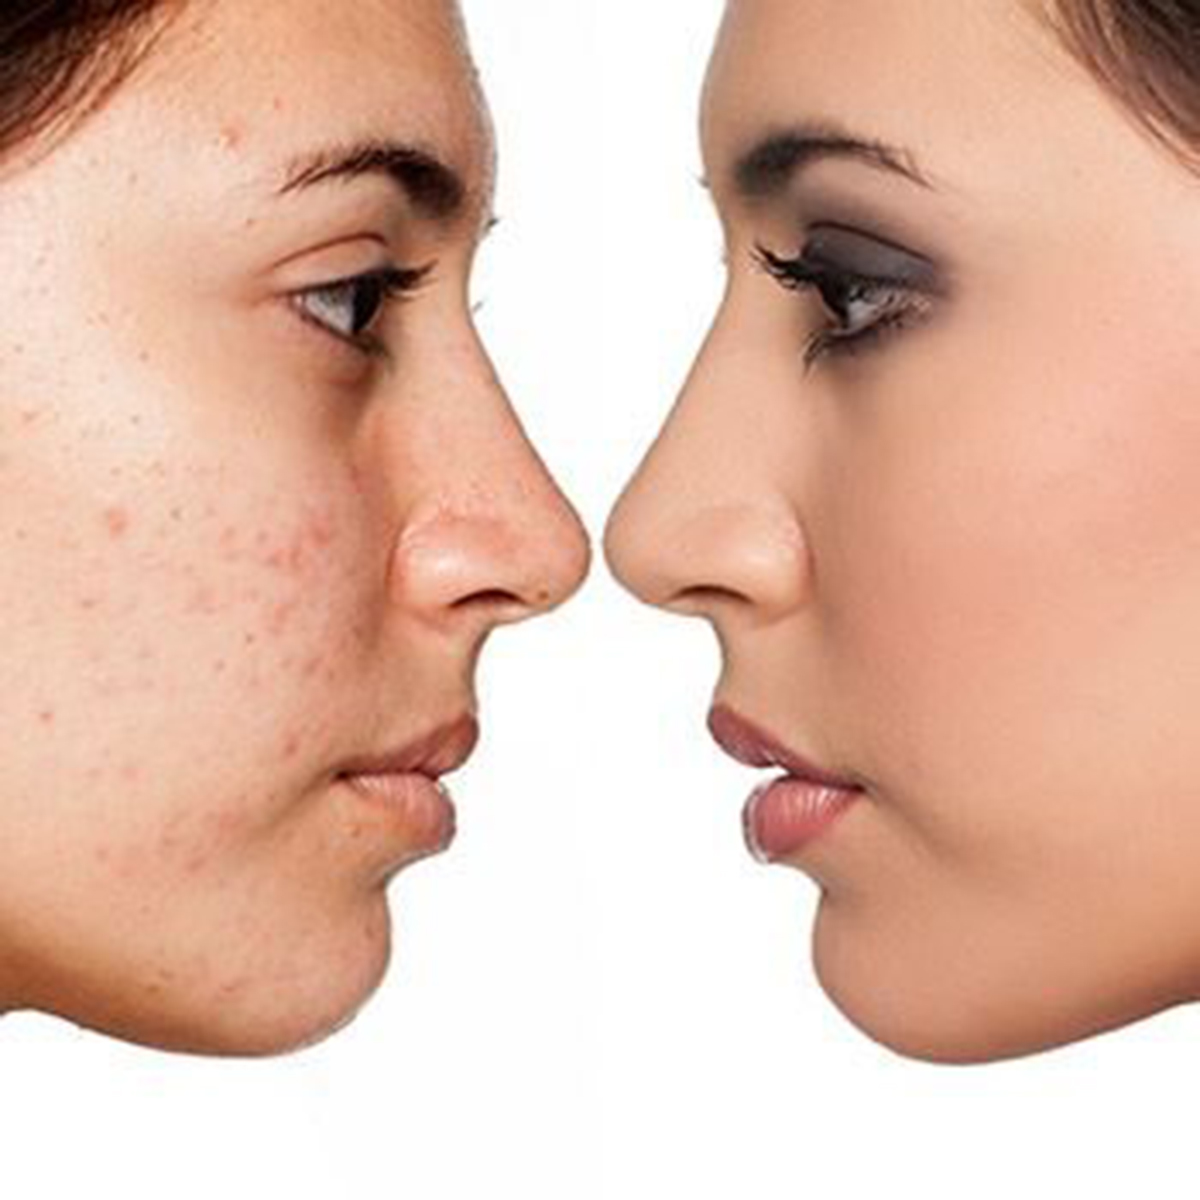 Treatment for pimple scars